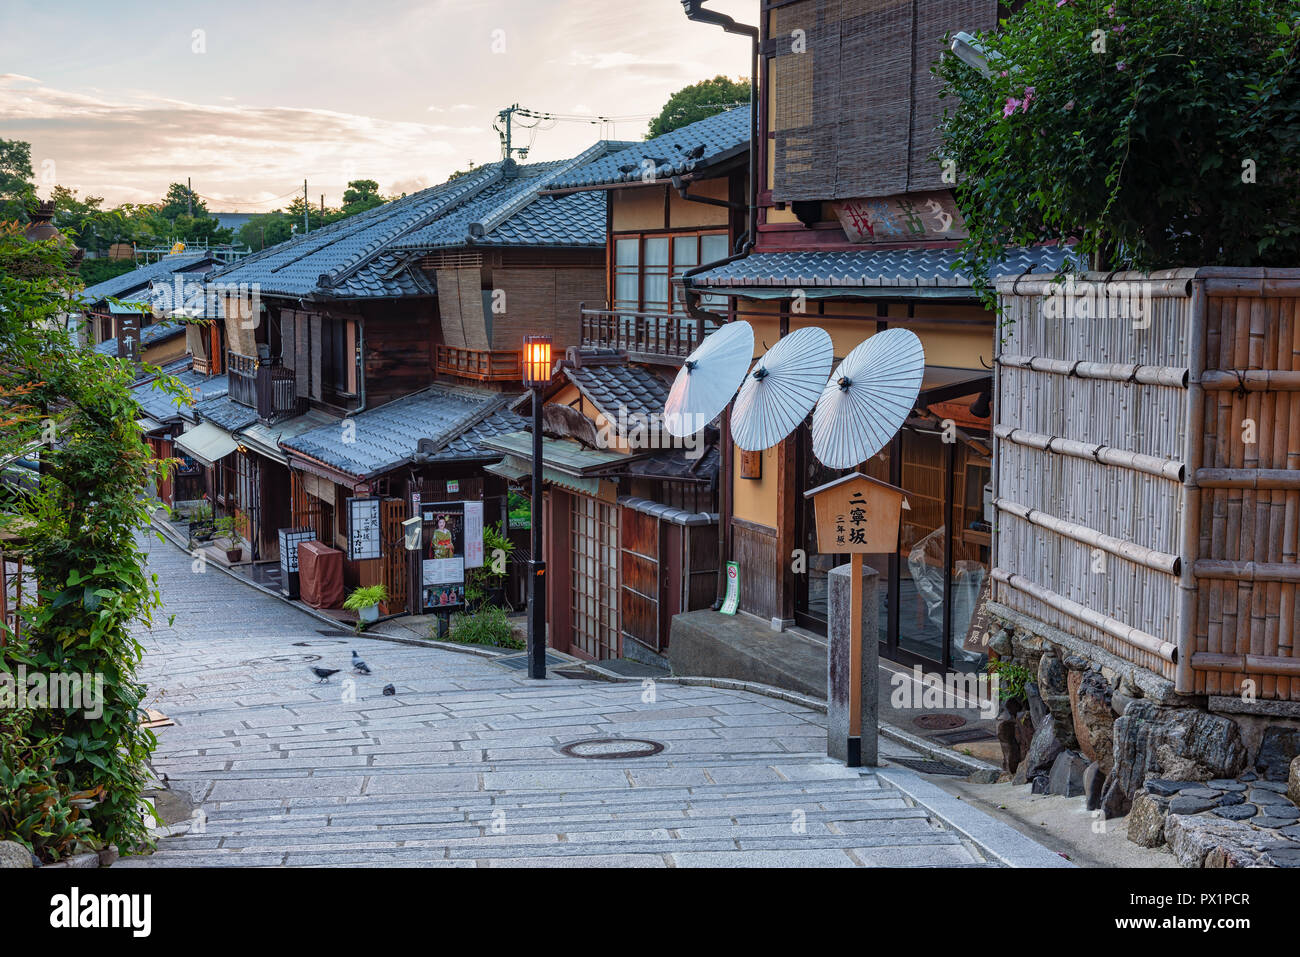 Kyoto Japan - Japanese Old Town Stock Photo